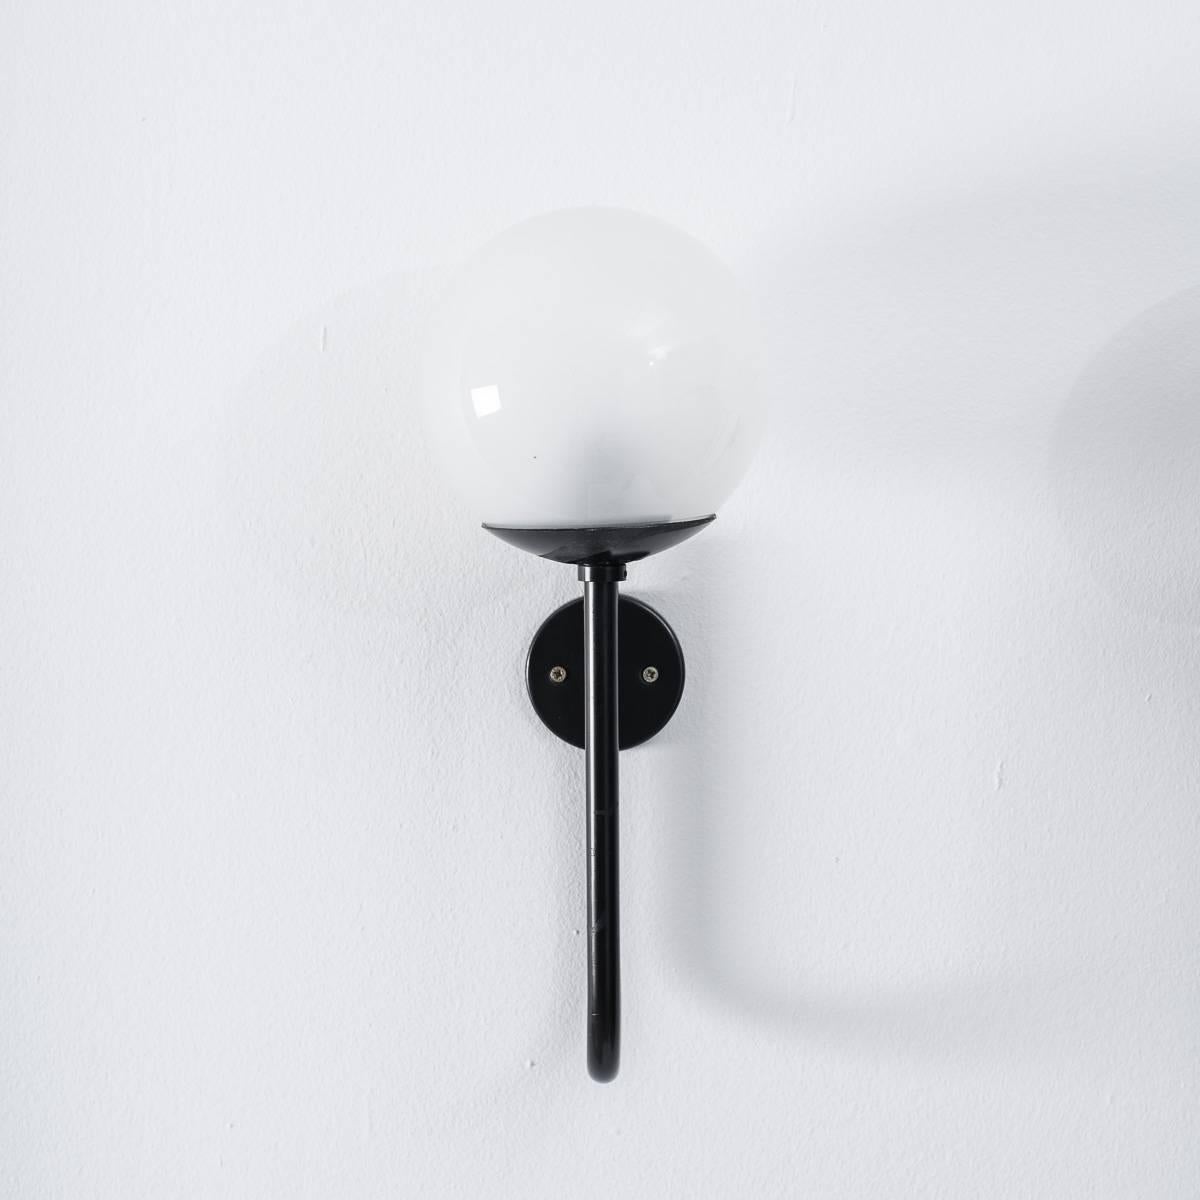 These are a striking pair of wall lights by the prominent Italian architect Sergio Asti for Arteluce. They are formed from a simplistic line created through bent and painted steel. This is crowned with an opaline spherical shade that sits